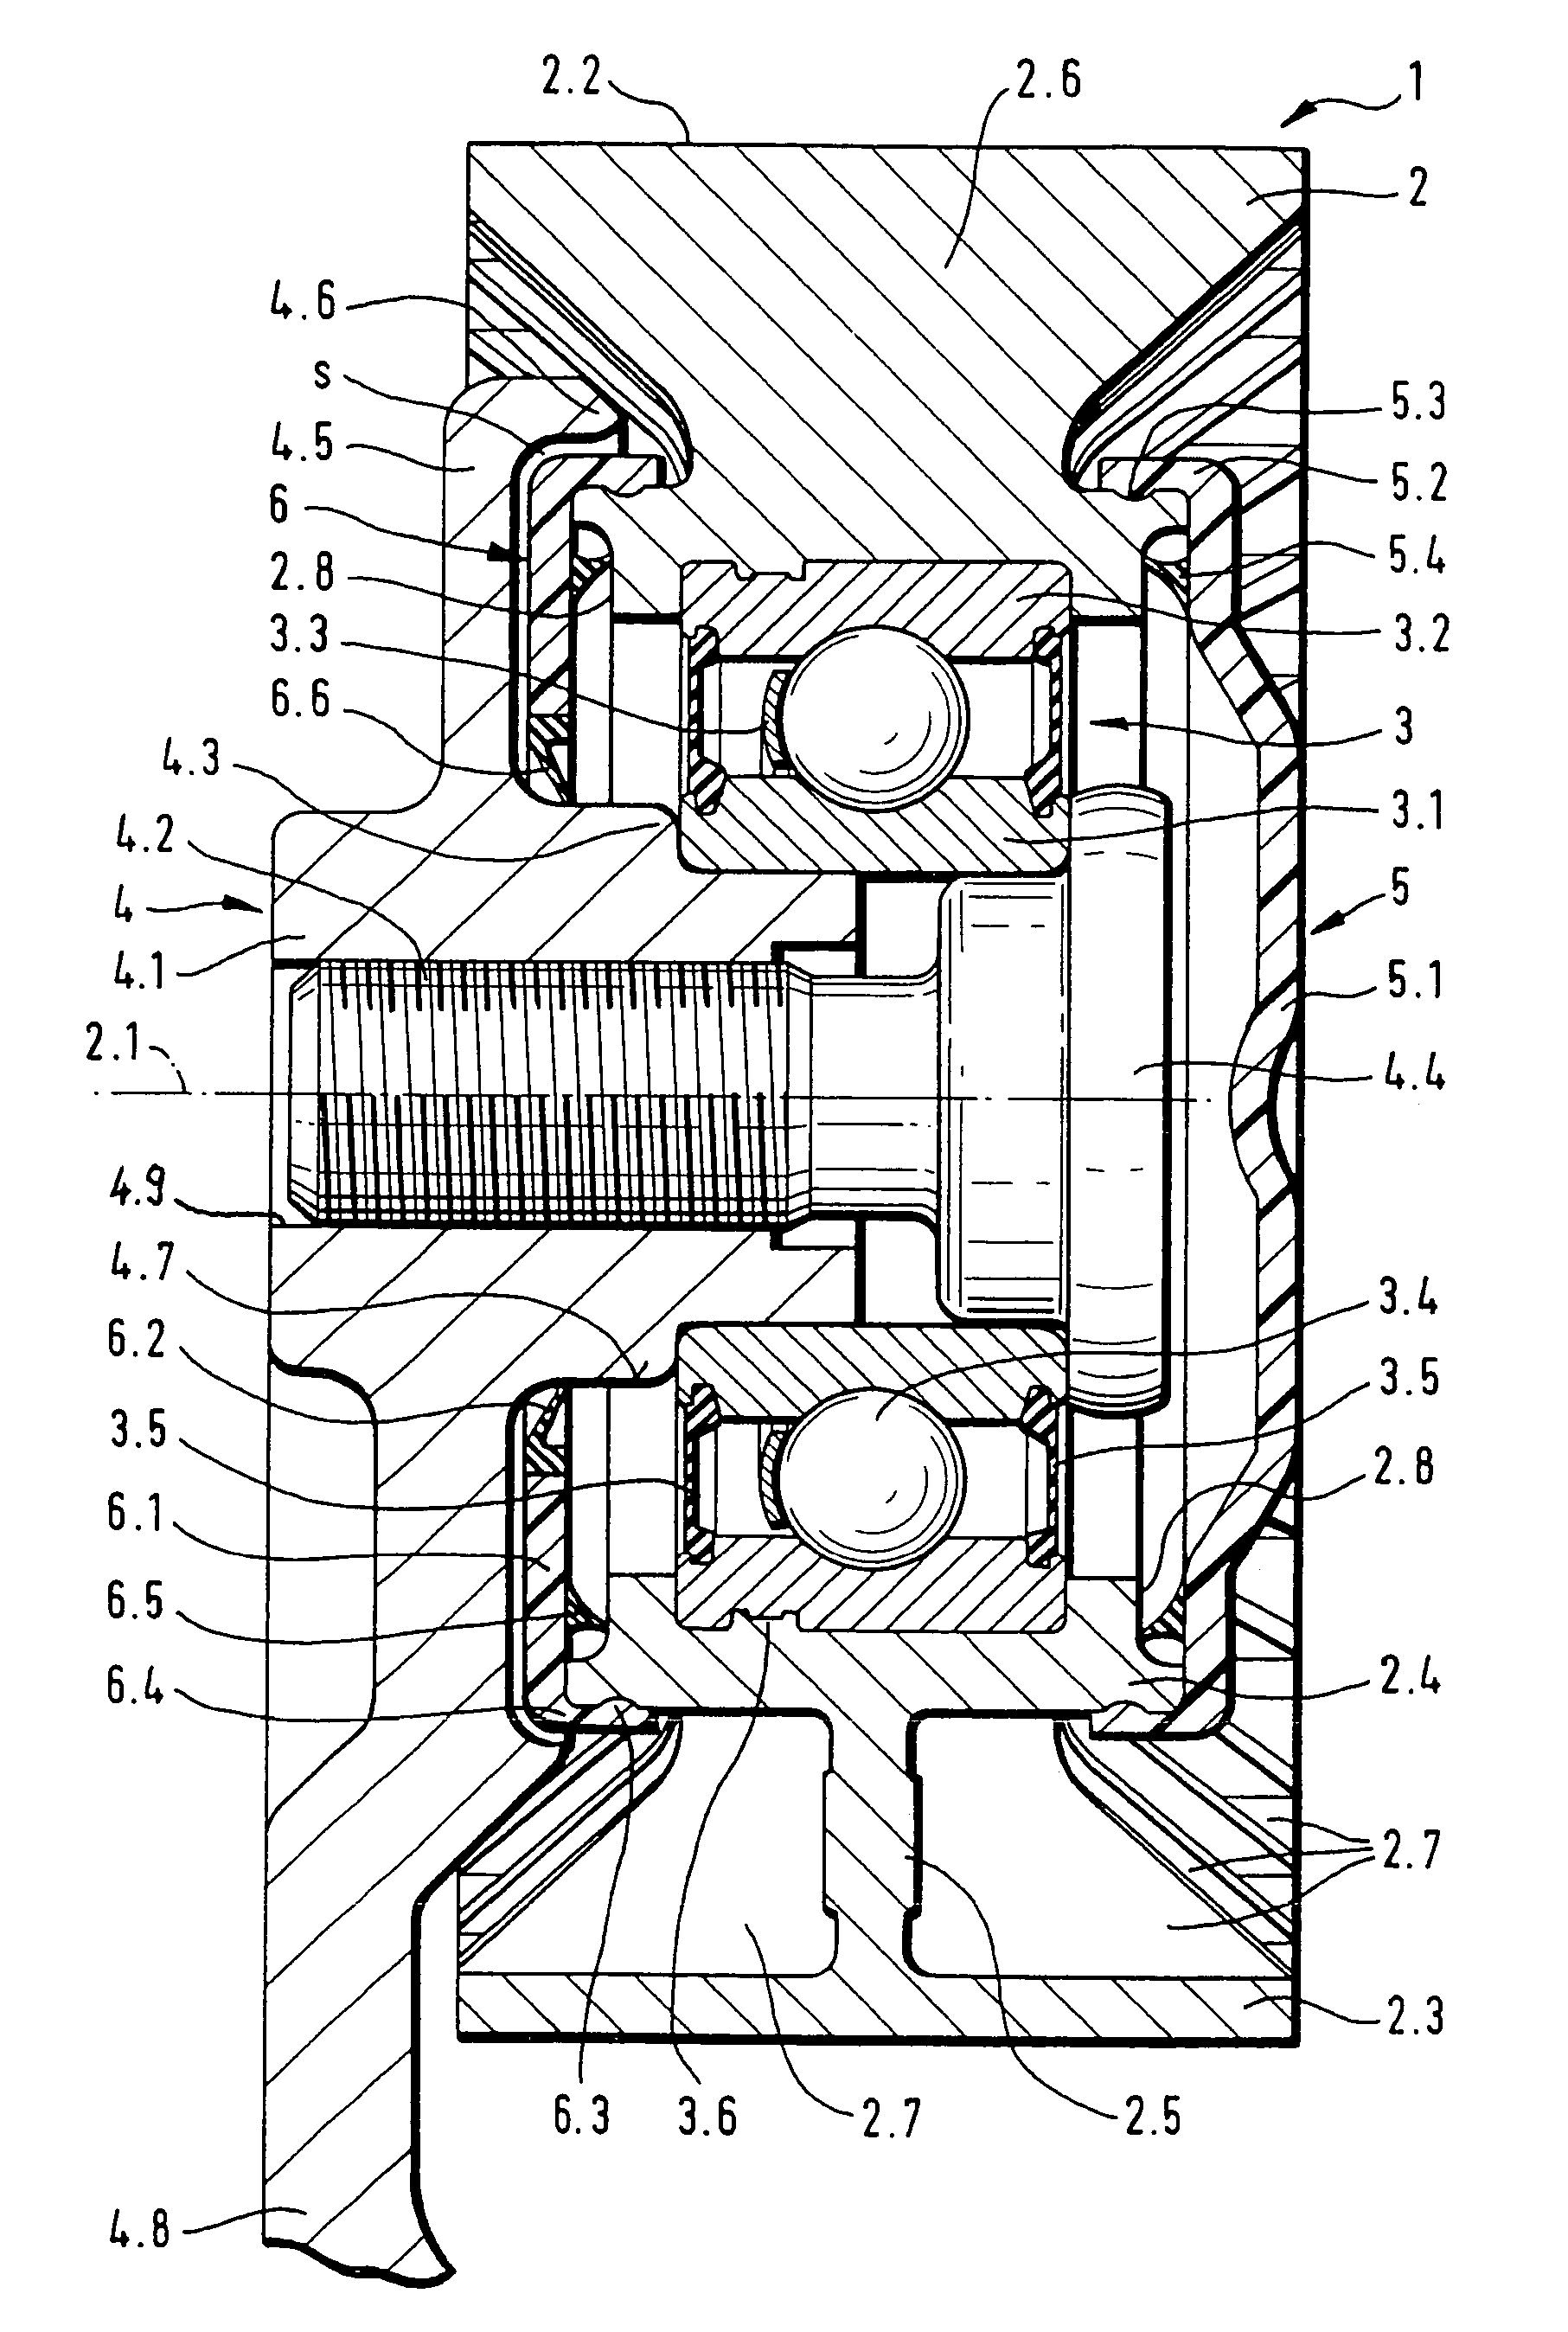 Tensioning or deflection pulley for a belt drive